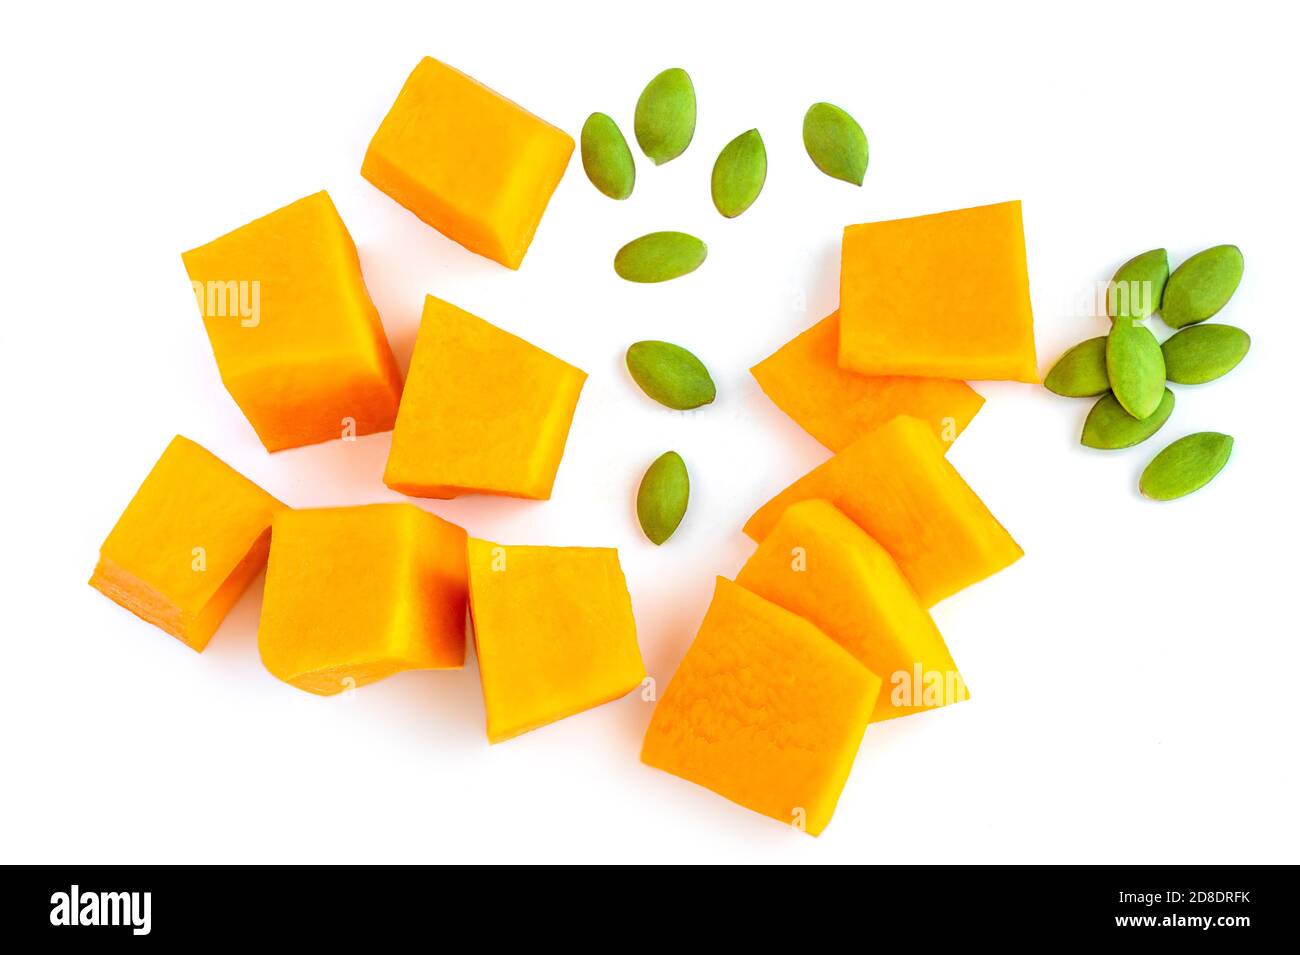 Diced Pumpkin  isolated on white background.  Pumpkin slices with seeds, top view. Flat lay Stock Photo